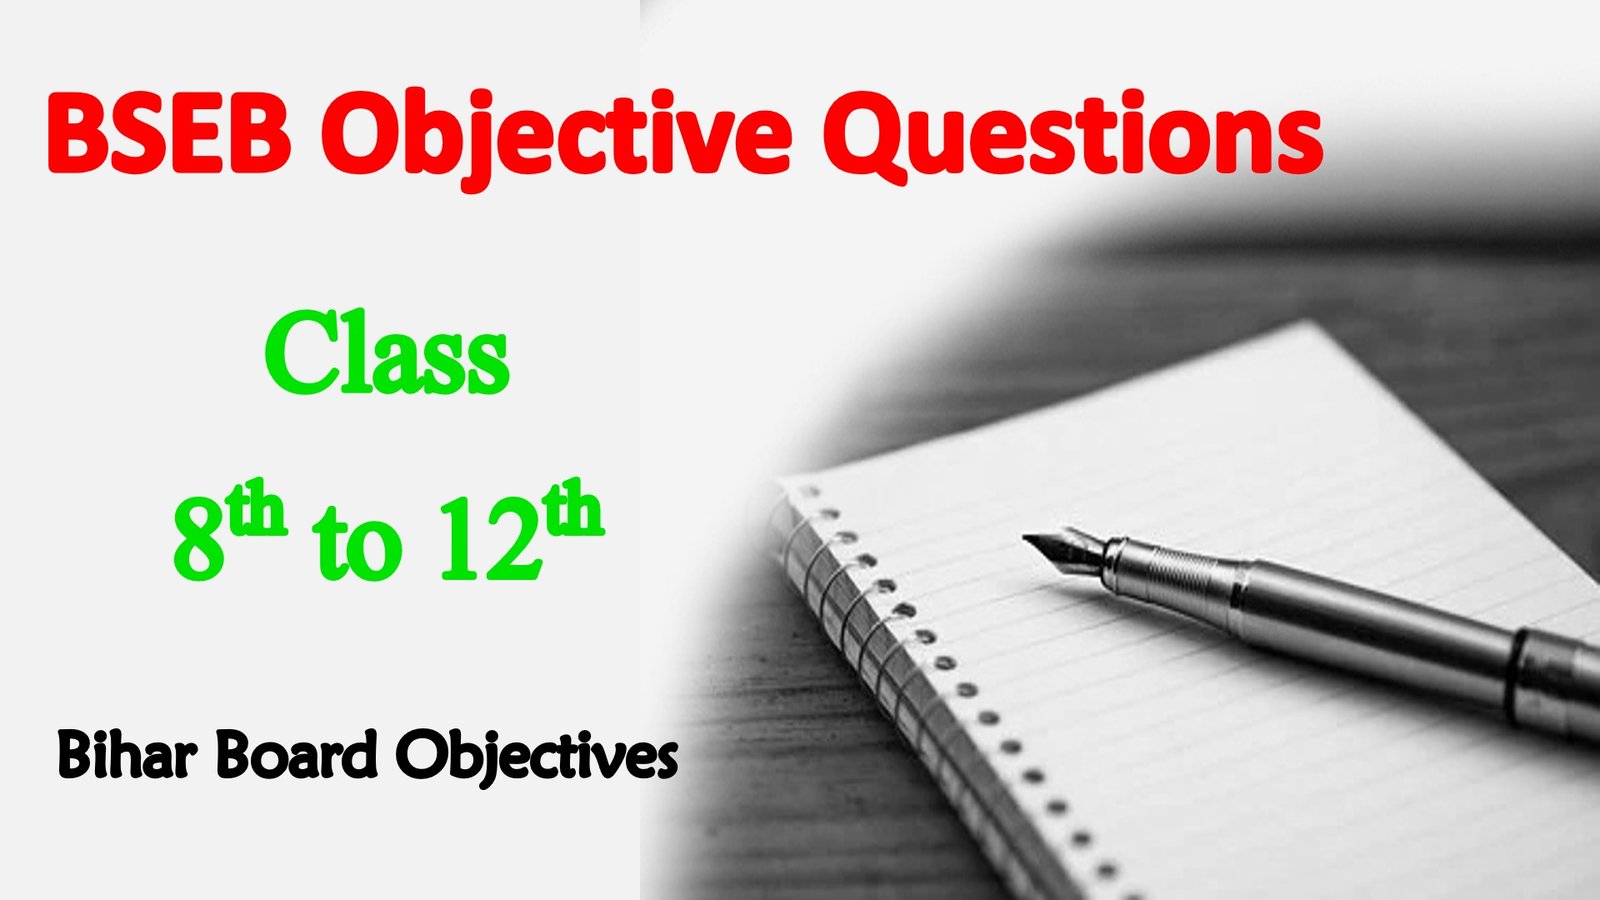 BSEB Objective Questions